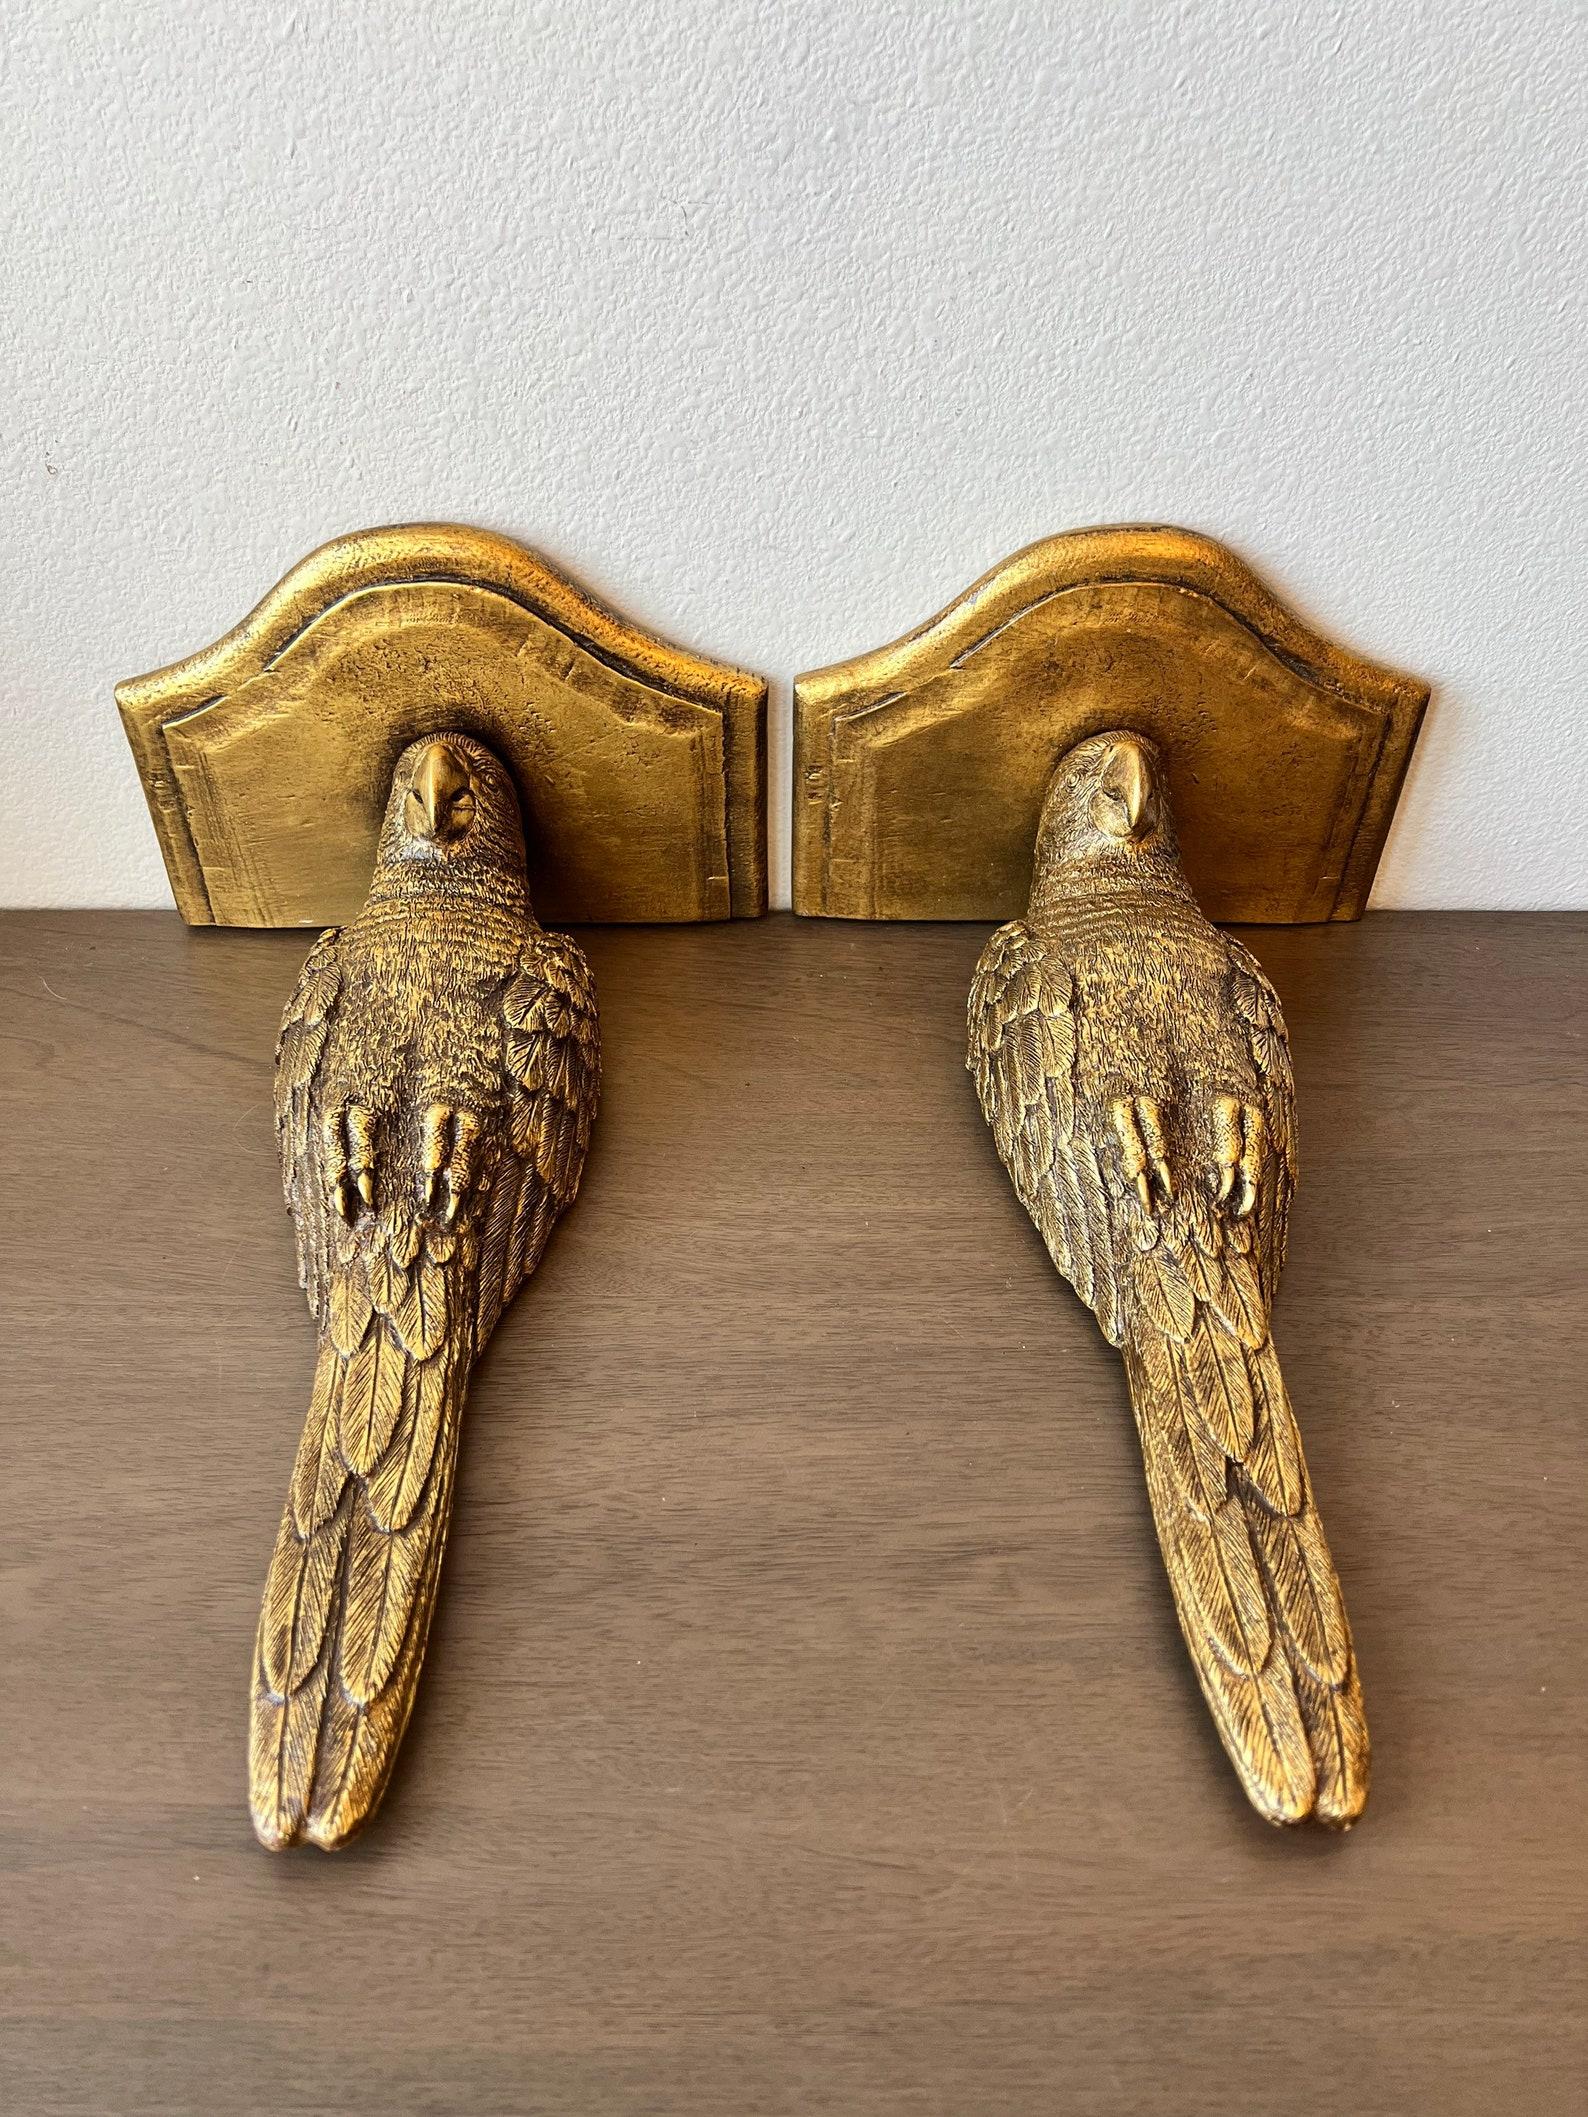 A most attractive pair of vintage sculptural avian wall brackets, mid-20th century, stunning Hollywood Regency Glam taste, finely detailed, rich brilliantly gilded finish composite parrot bird-form wall hanging bracket shelf.

Dimensions (approx,